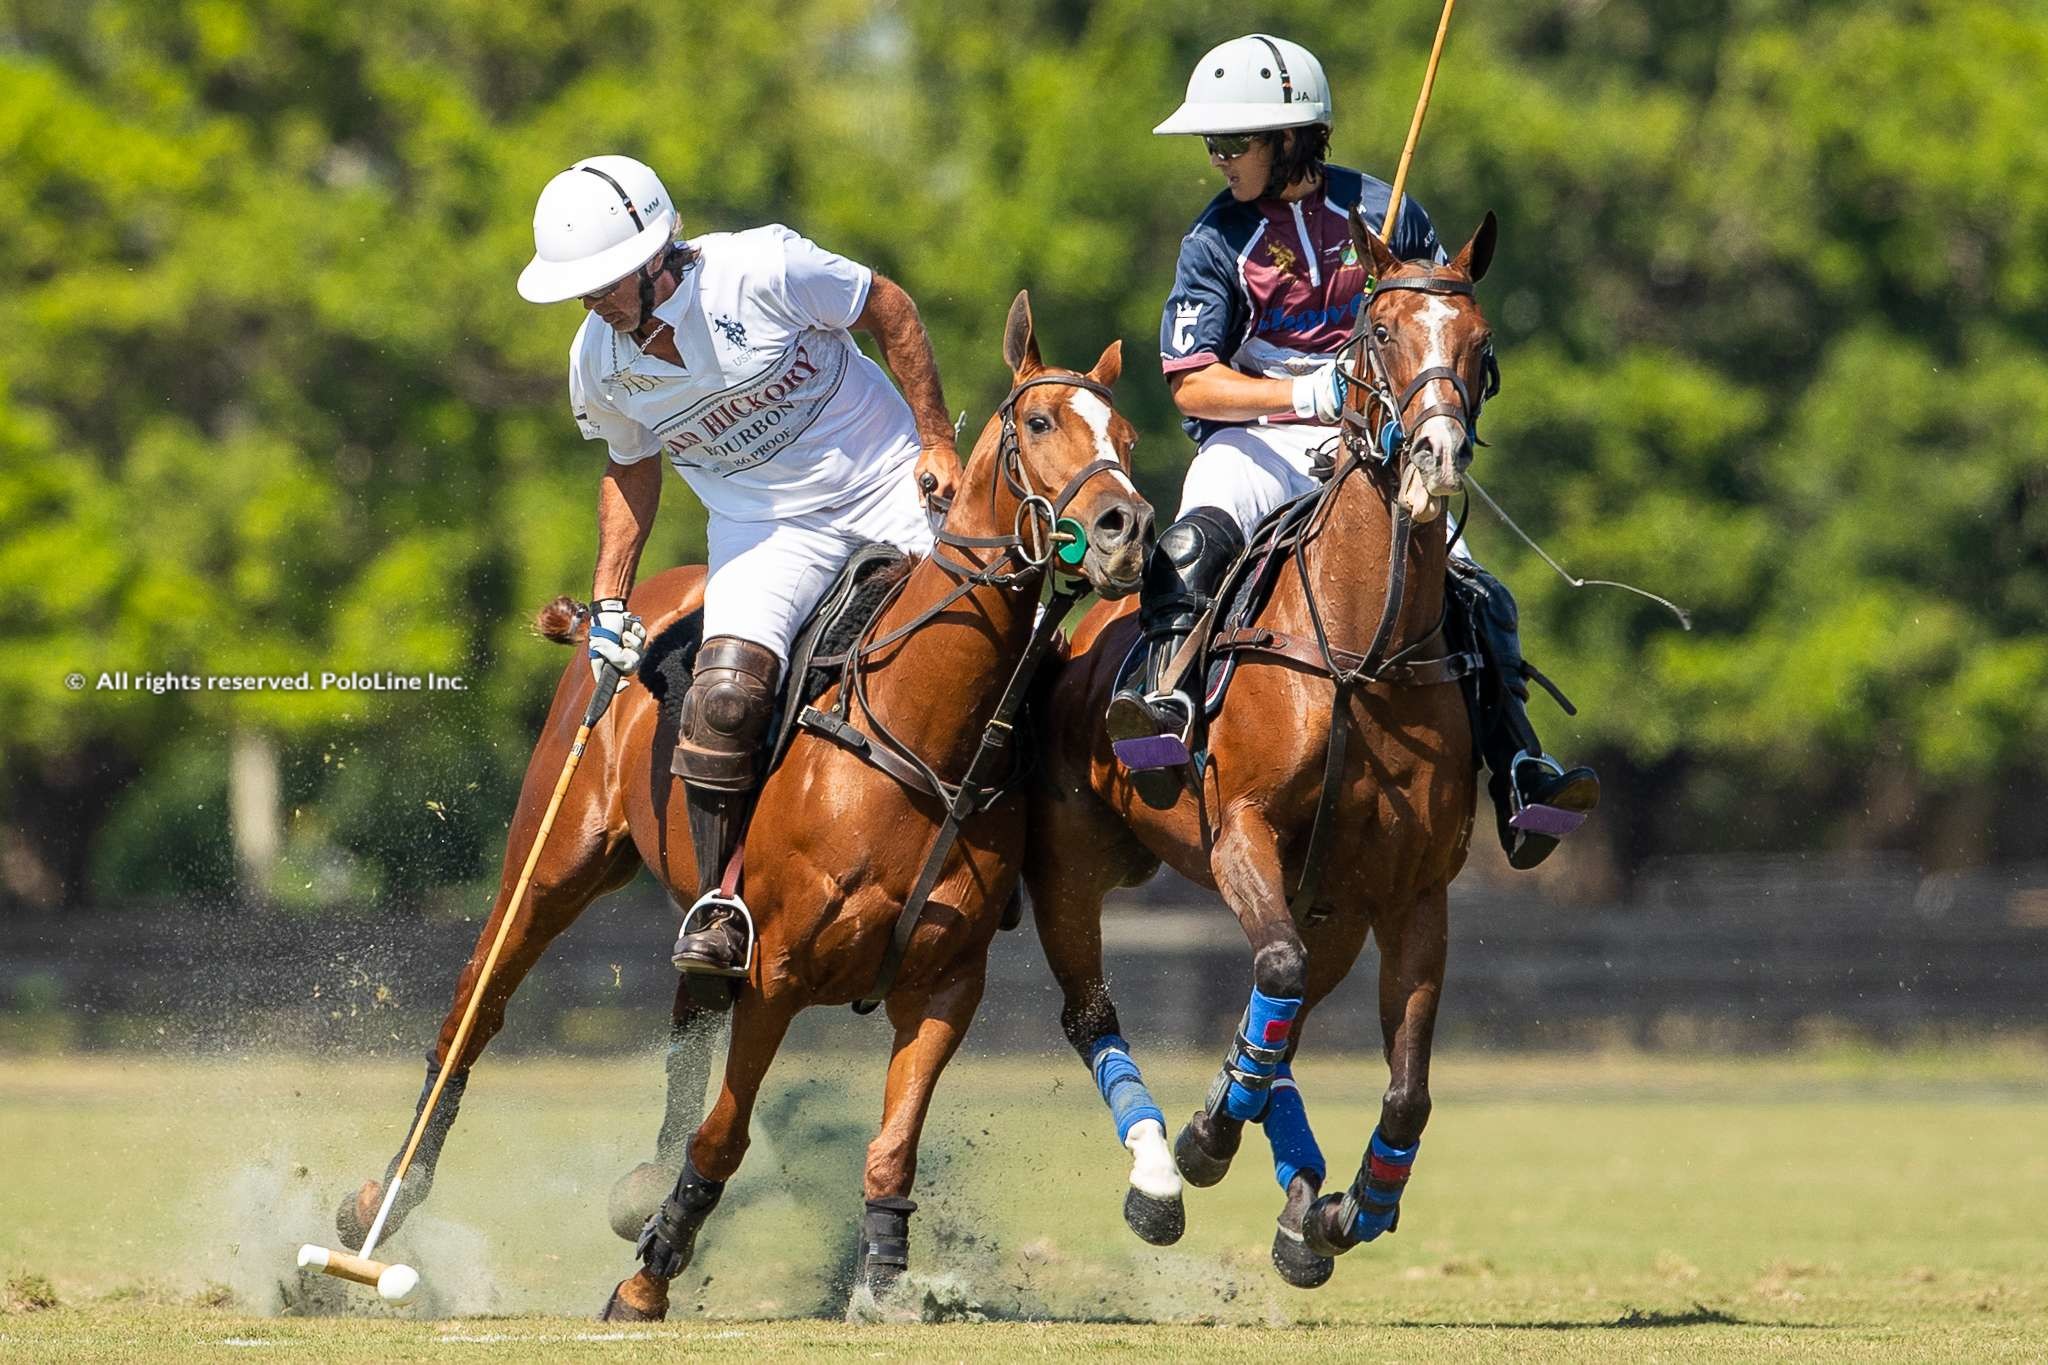 Old Hickory vs Dutta Corp / Show+